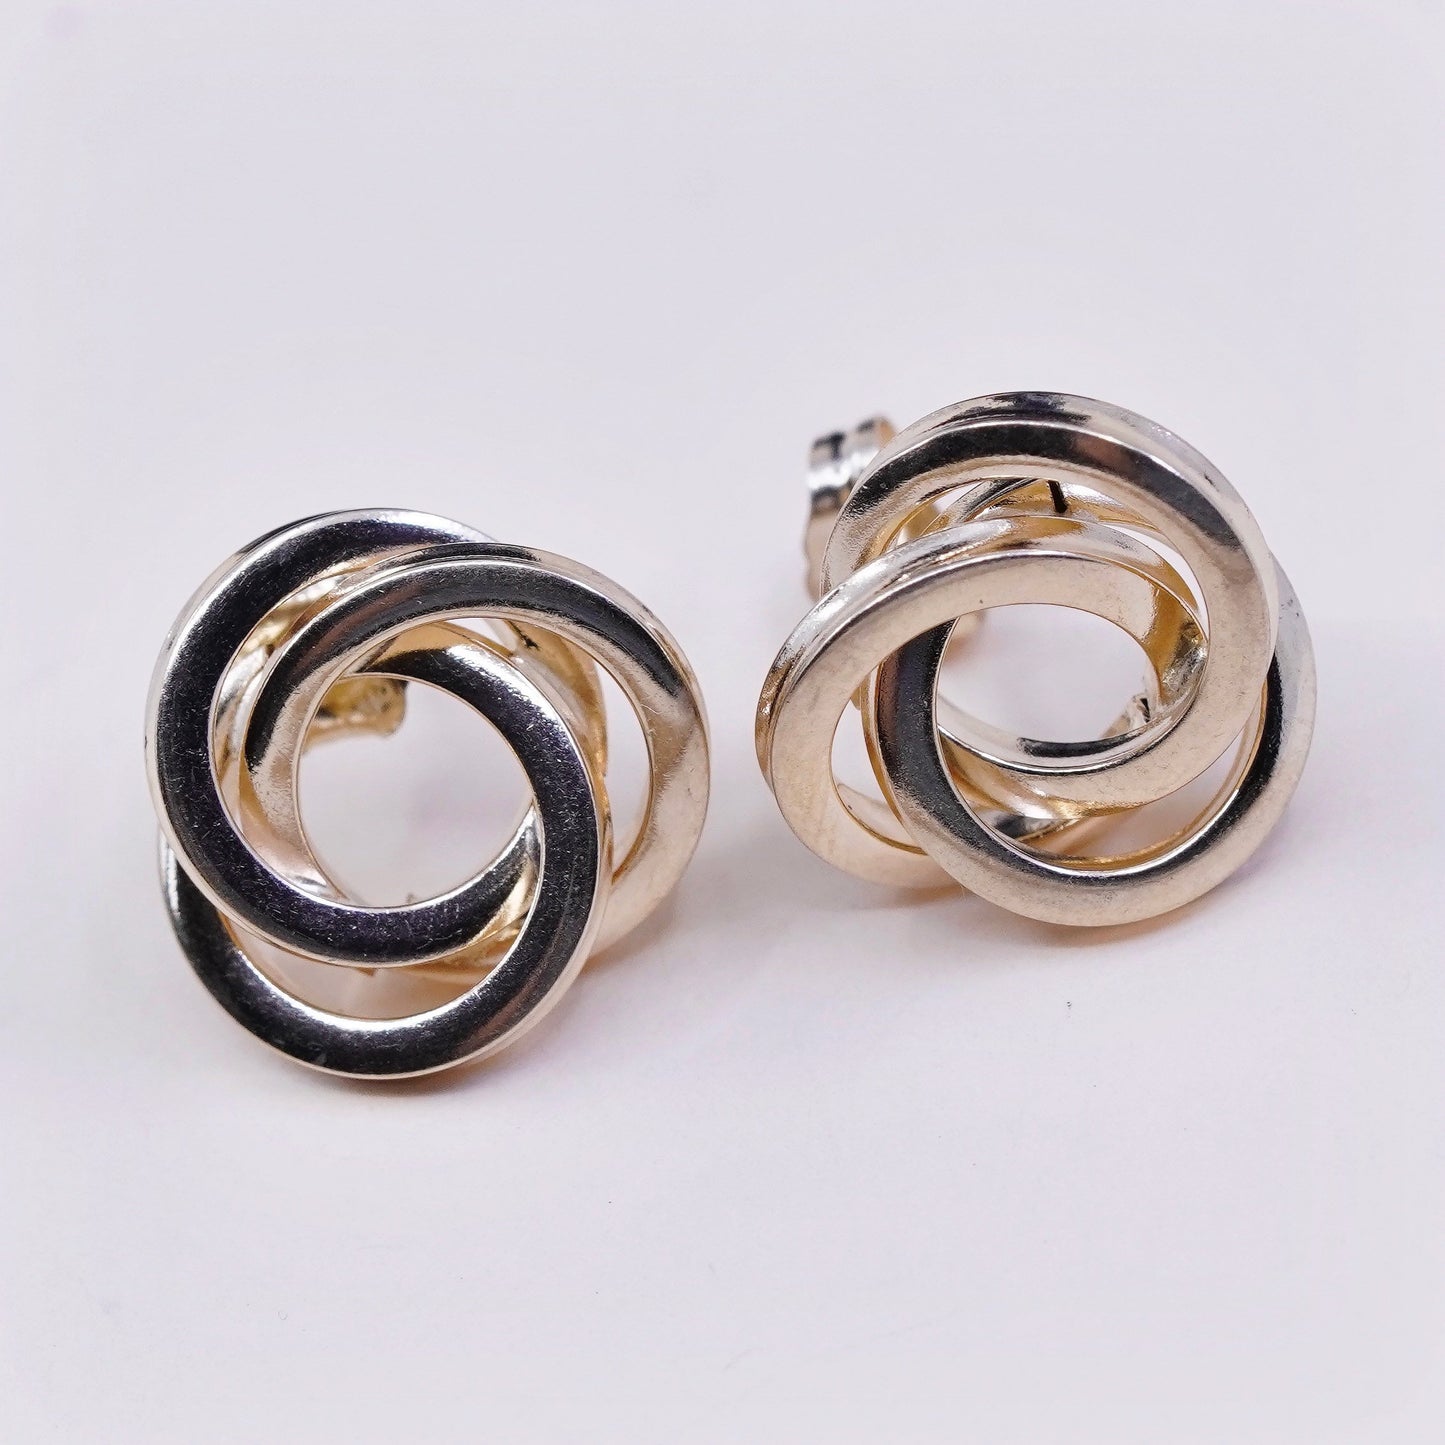 2.8g, vintage 14K yellow gold earrings, real gold edgy entwined circle studs , stamped 14K